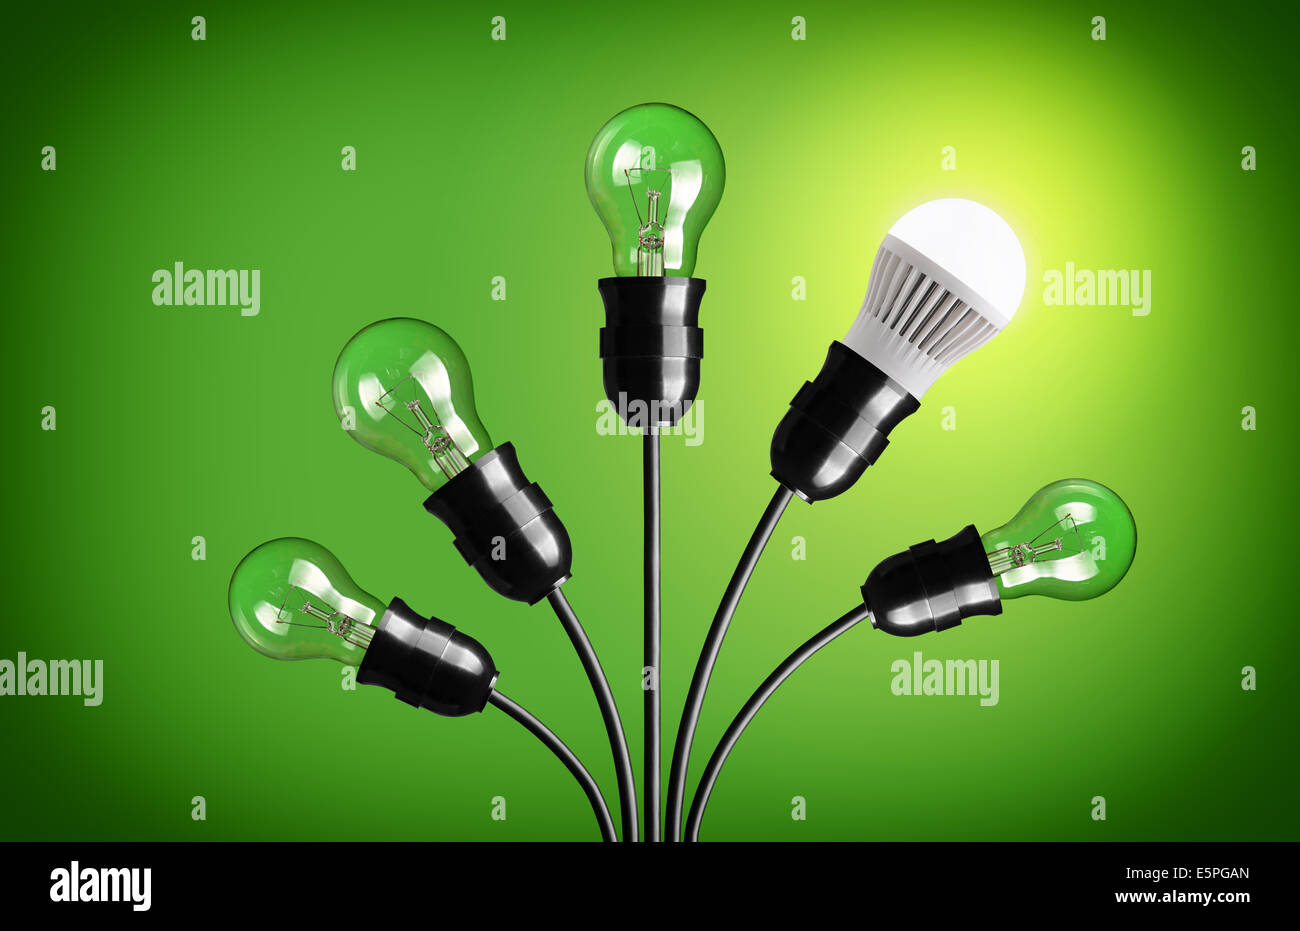 Idea concept with light bulbs. Green background Stock Photo